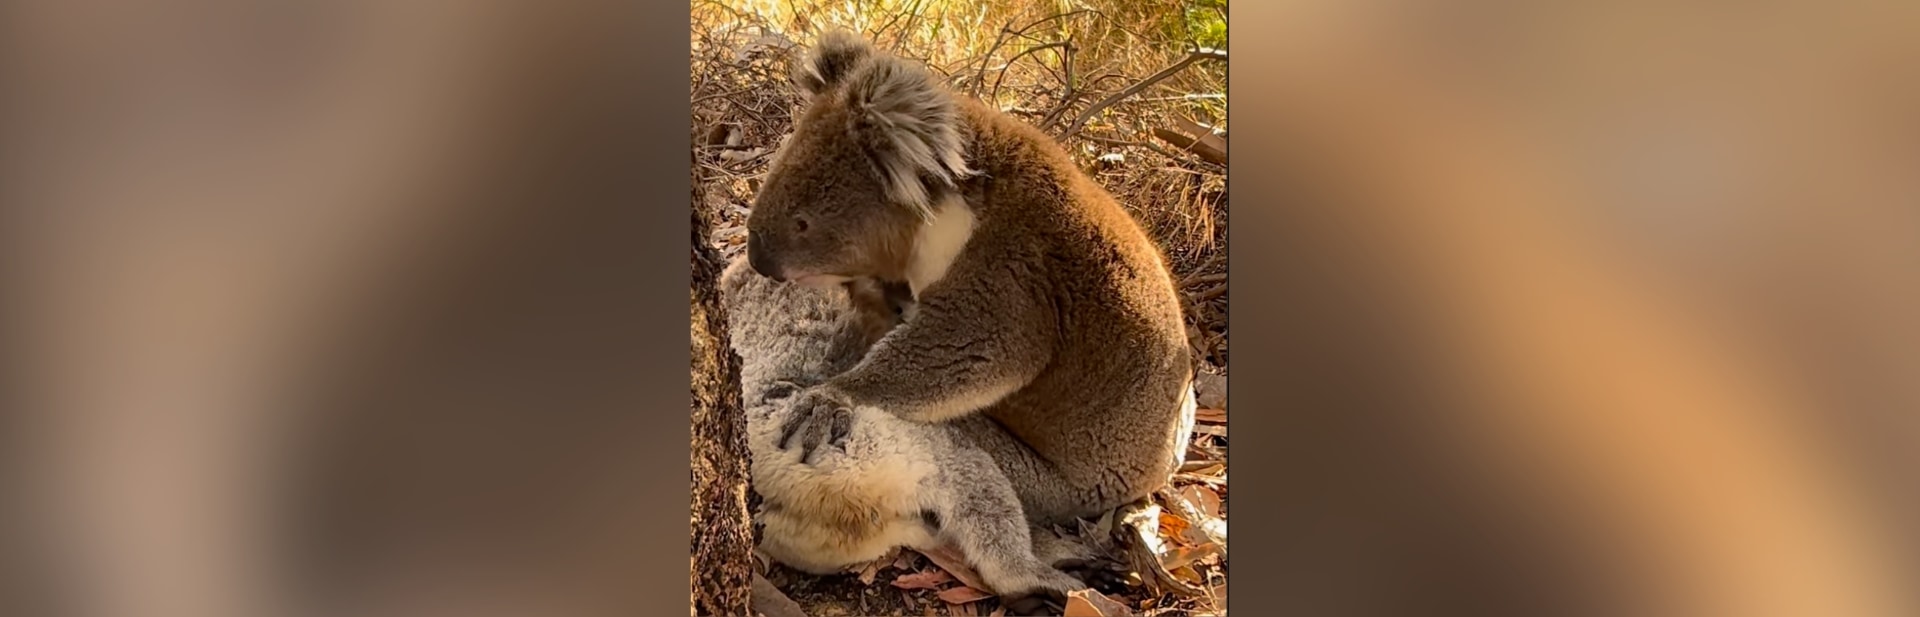 This Koala’s Act of Grief Might Just Make You Cry